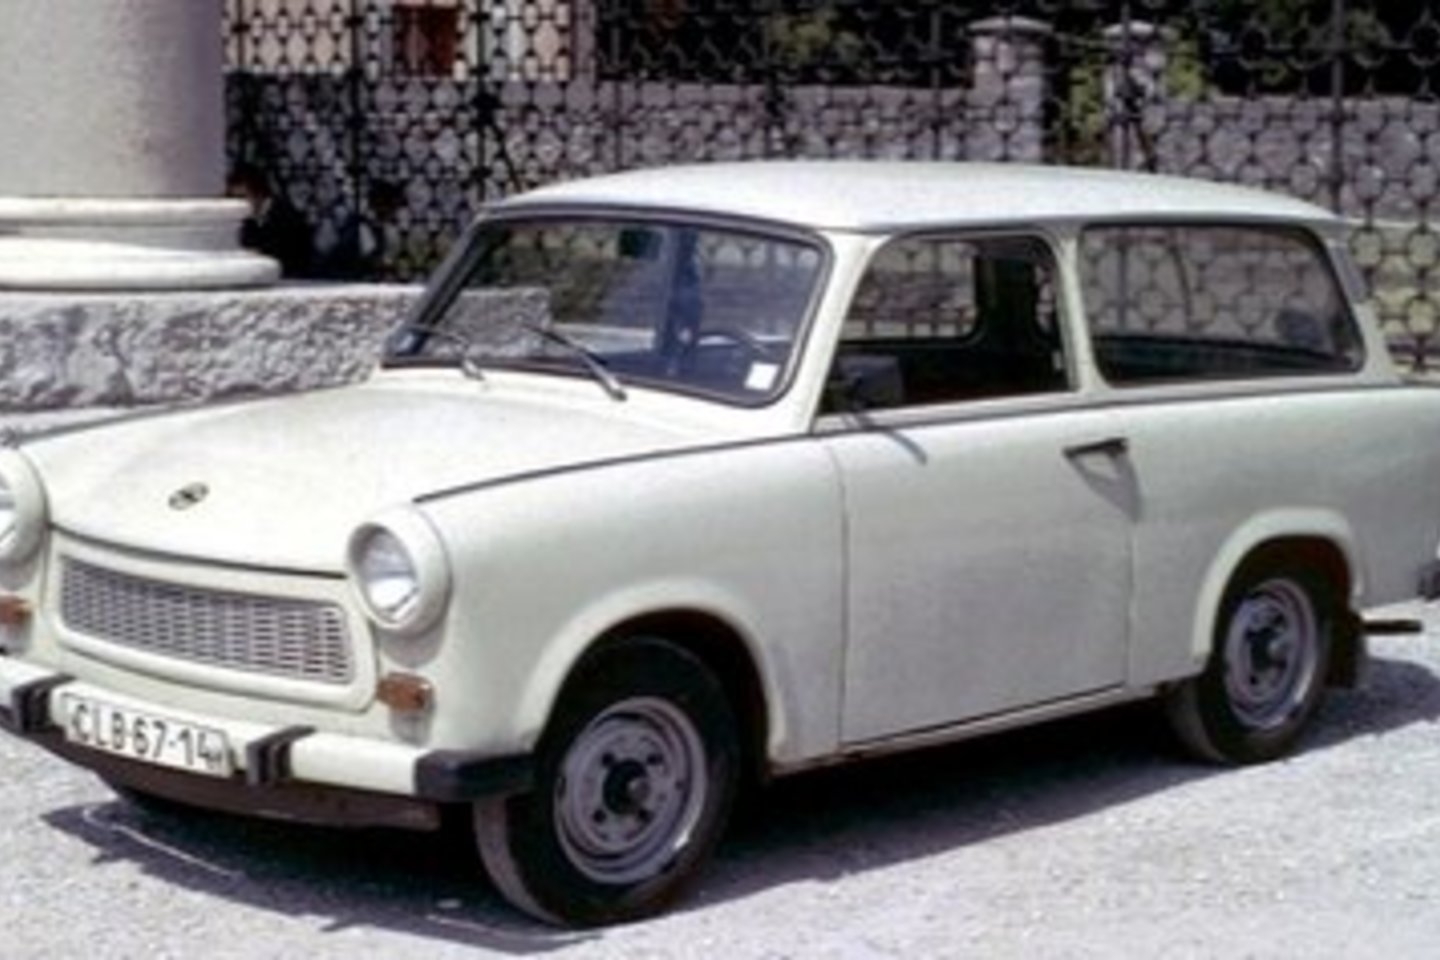  „Trabant“.<br> Charles01/Wikipedia nuotr.